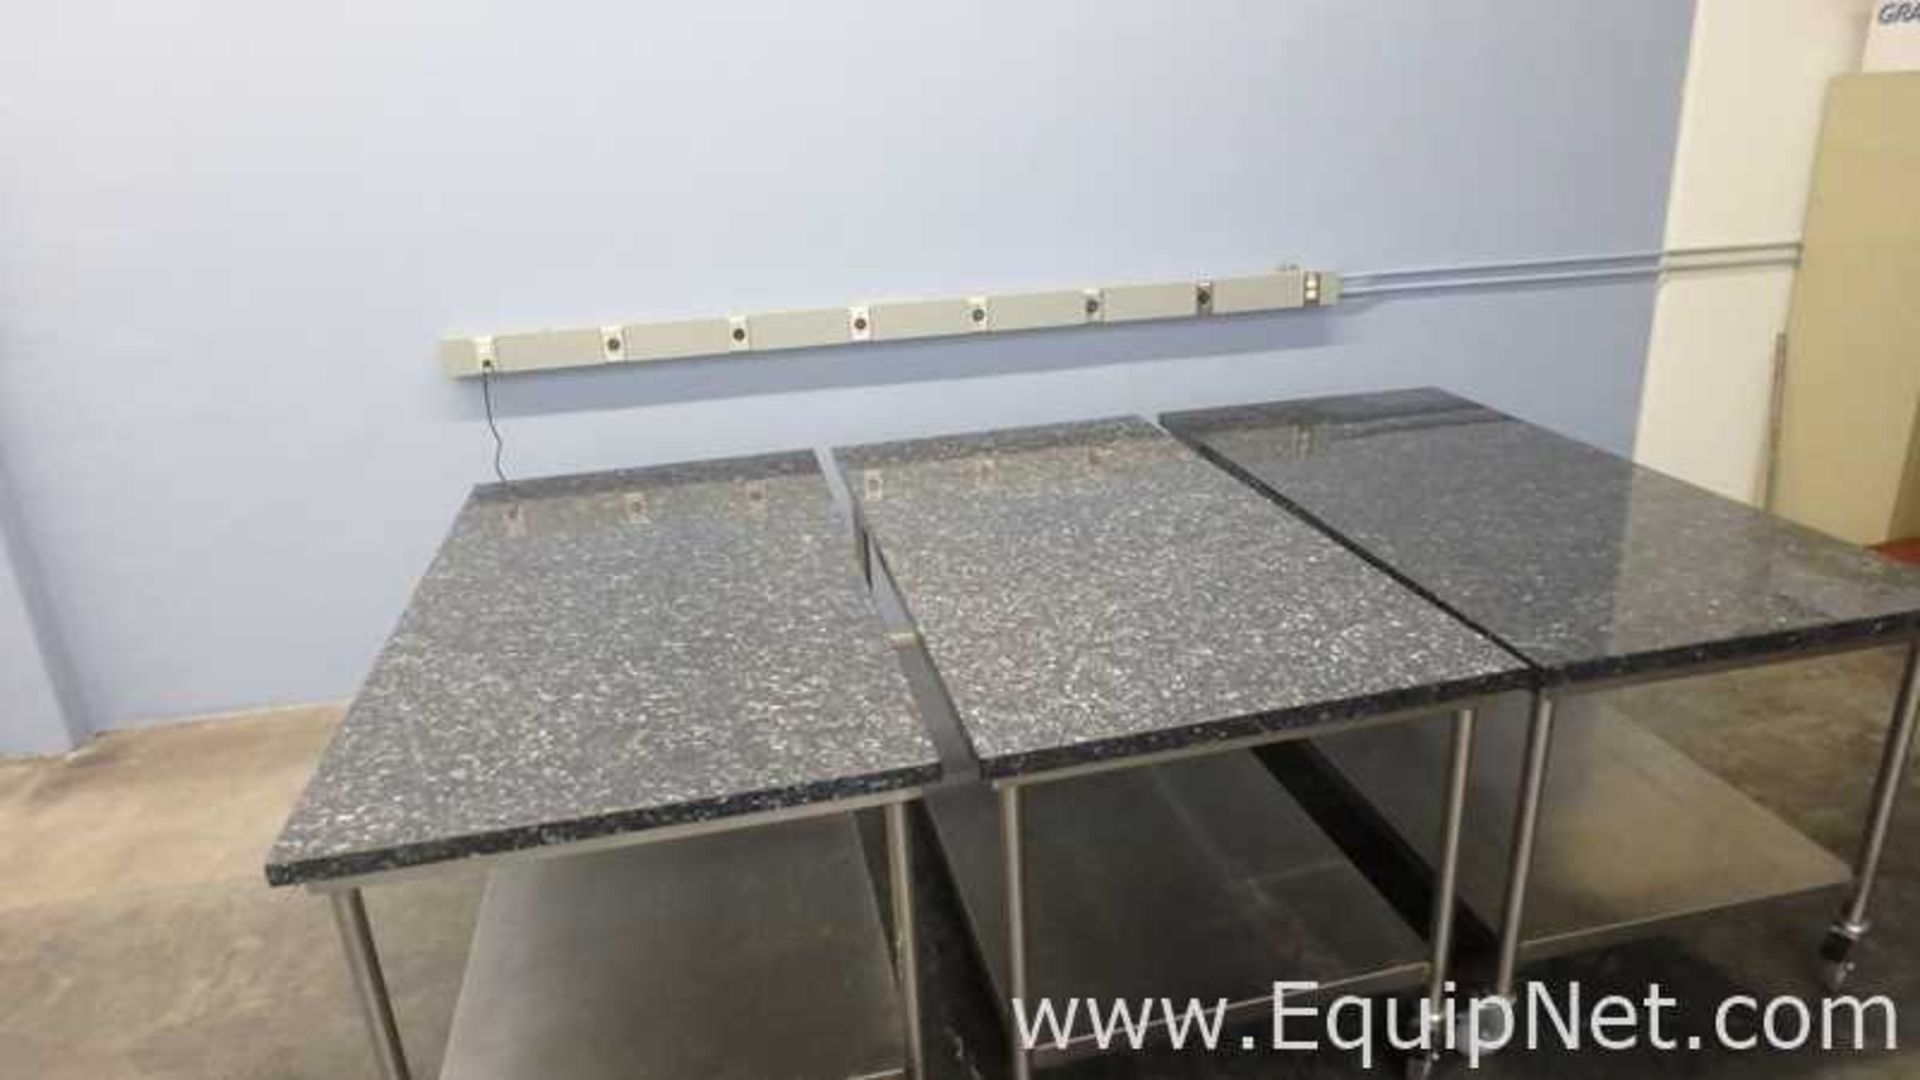 Lot of 3 Granite Top Stainless Steel Work Tables 75in x 39in - Image 8 of 9